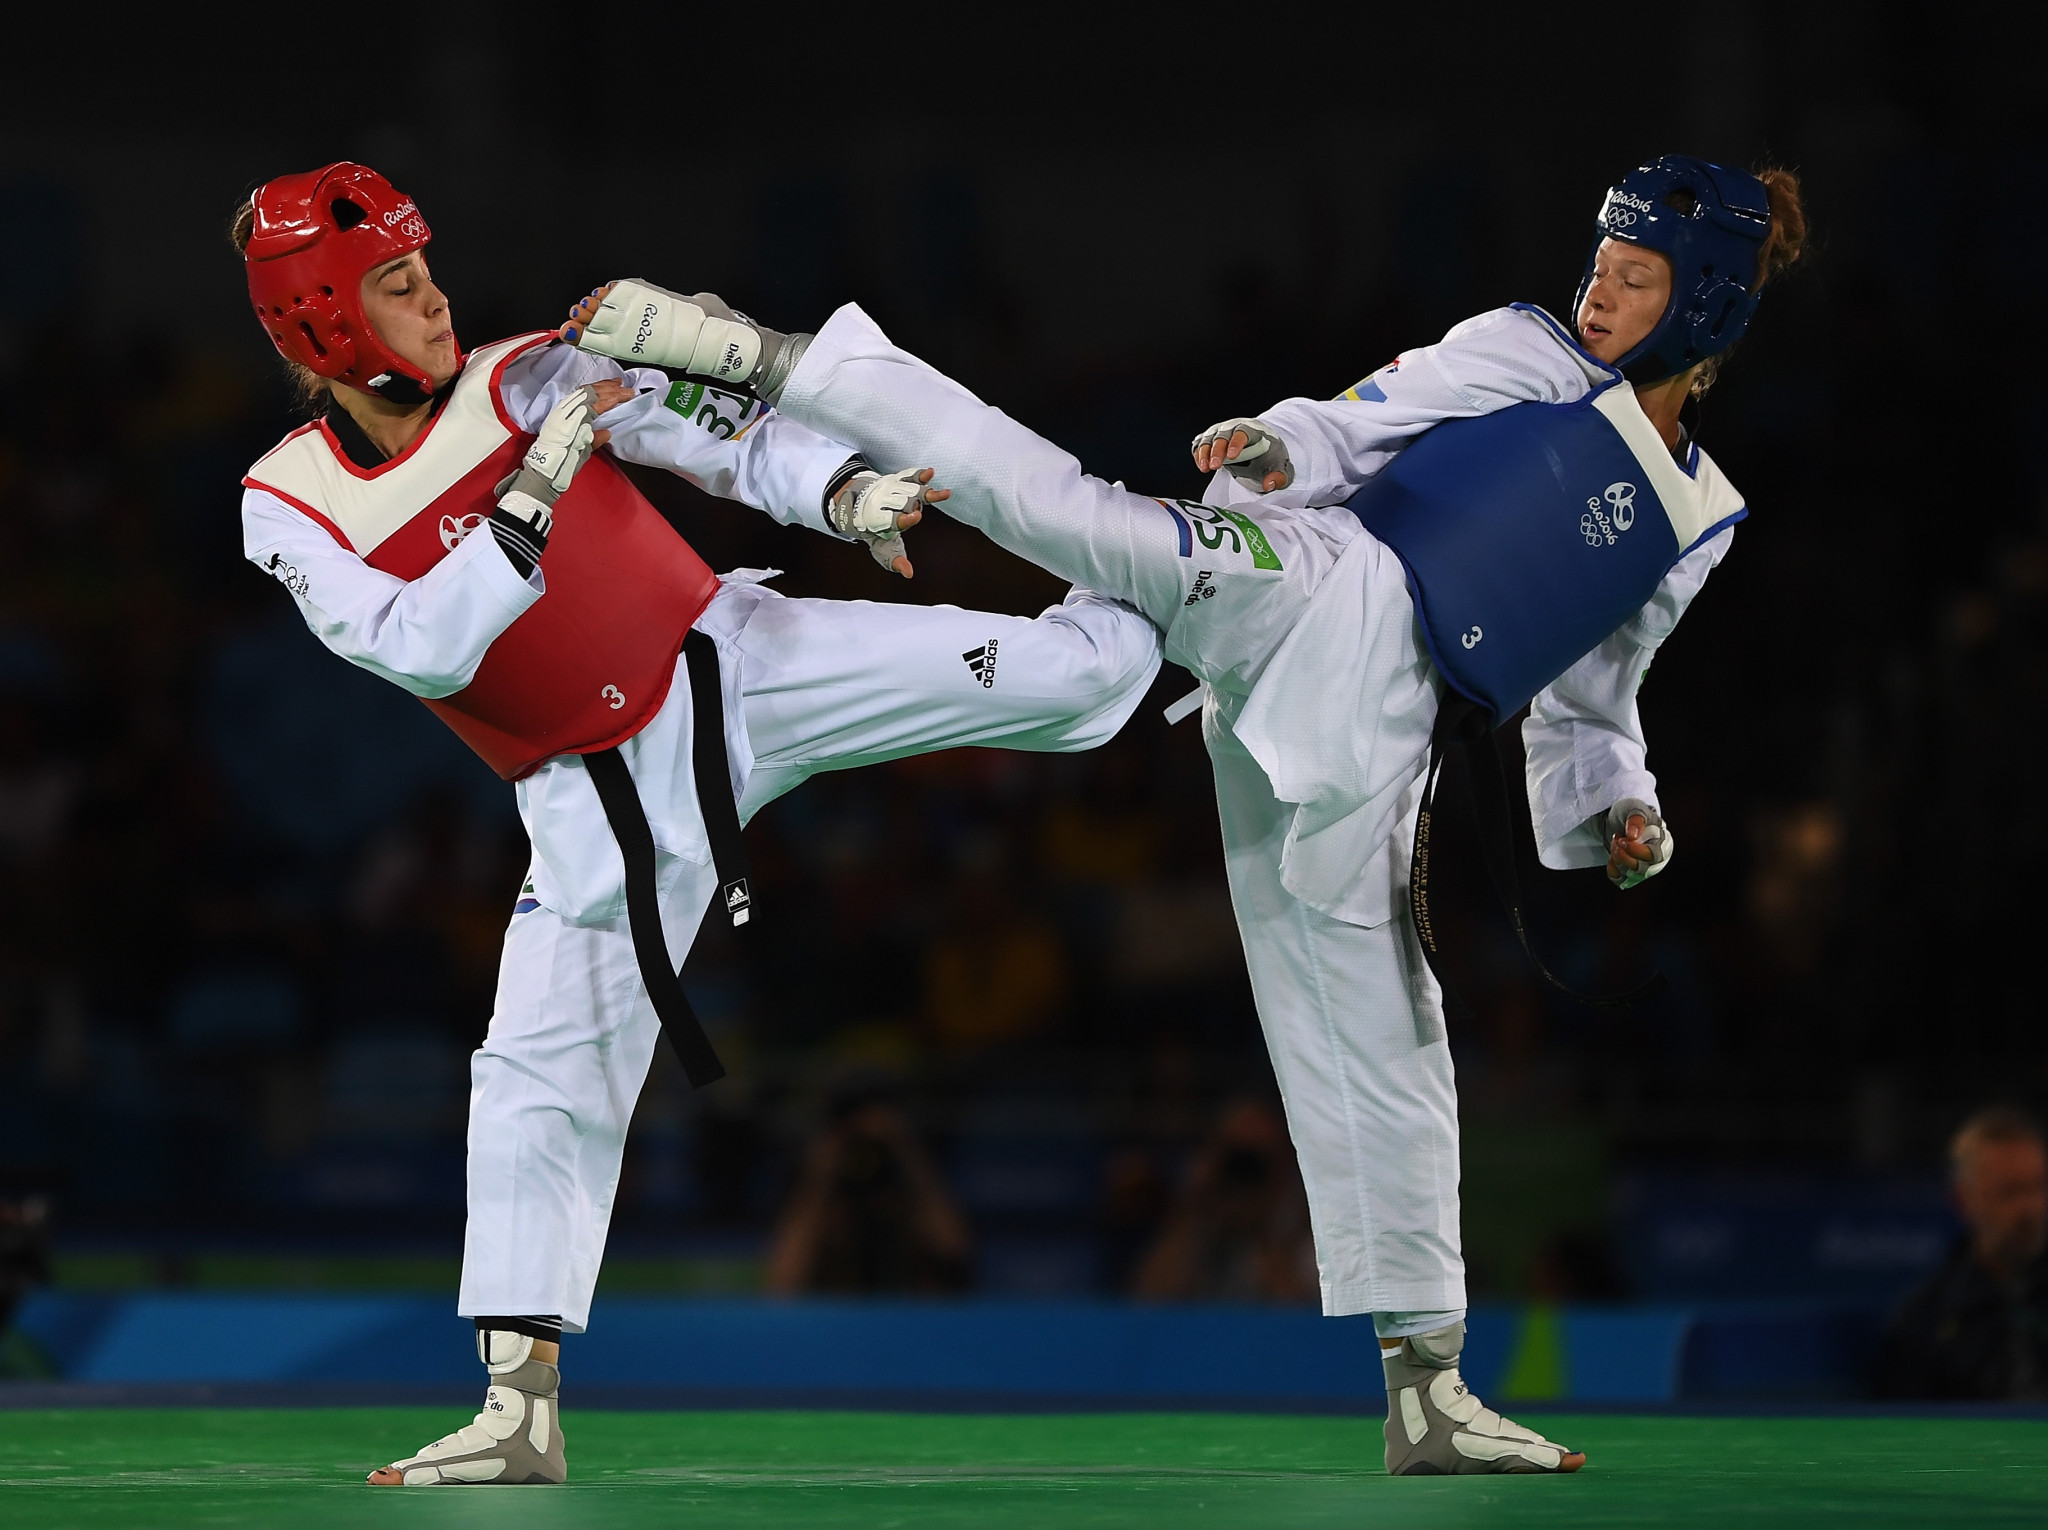 Caroline Marton was one of four athletes that represented Australia in taekwondo at the Rio 2016 Olympic Games ©Getty Images